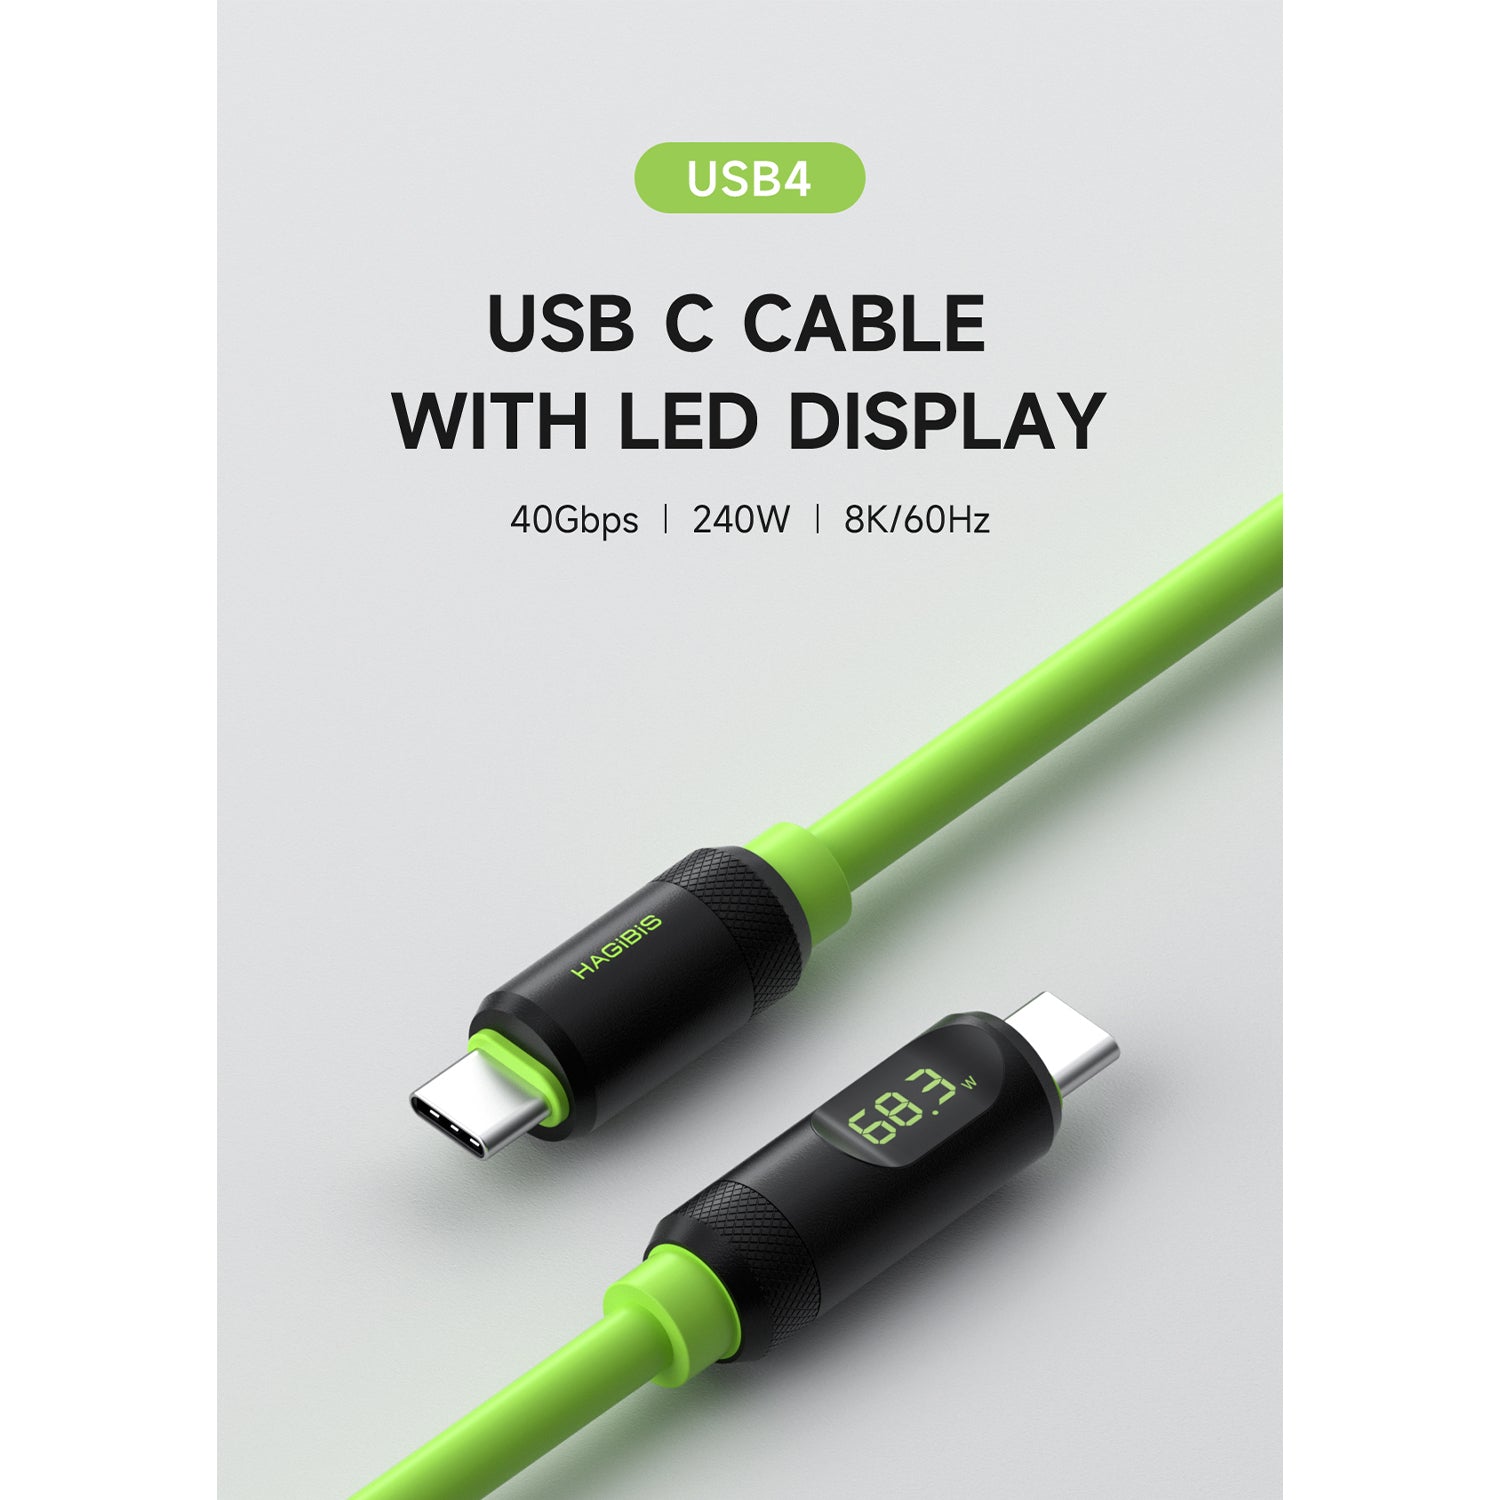 O2W SELECTION HAGIBIS SX02 Type-C All-in-One Cable (USB4,40Gbps,240W,8K60HZ Resolution)